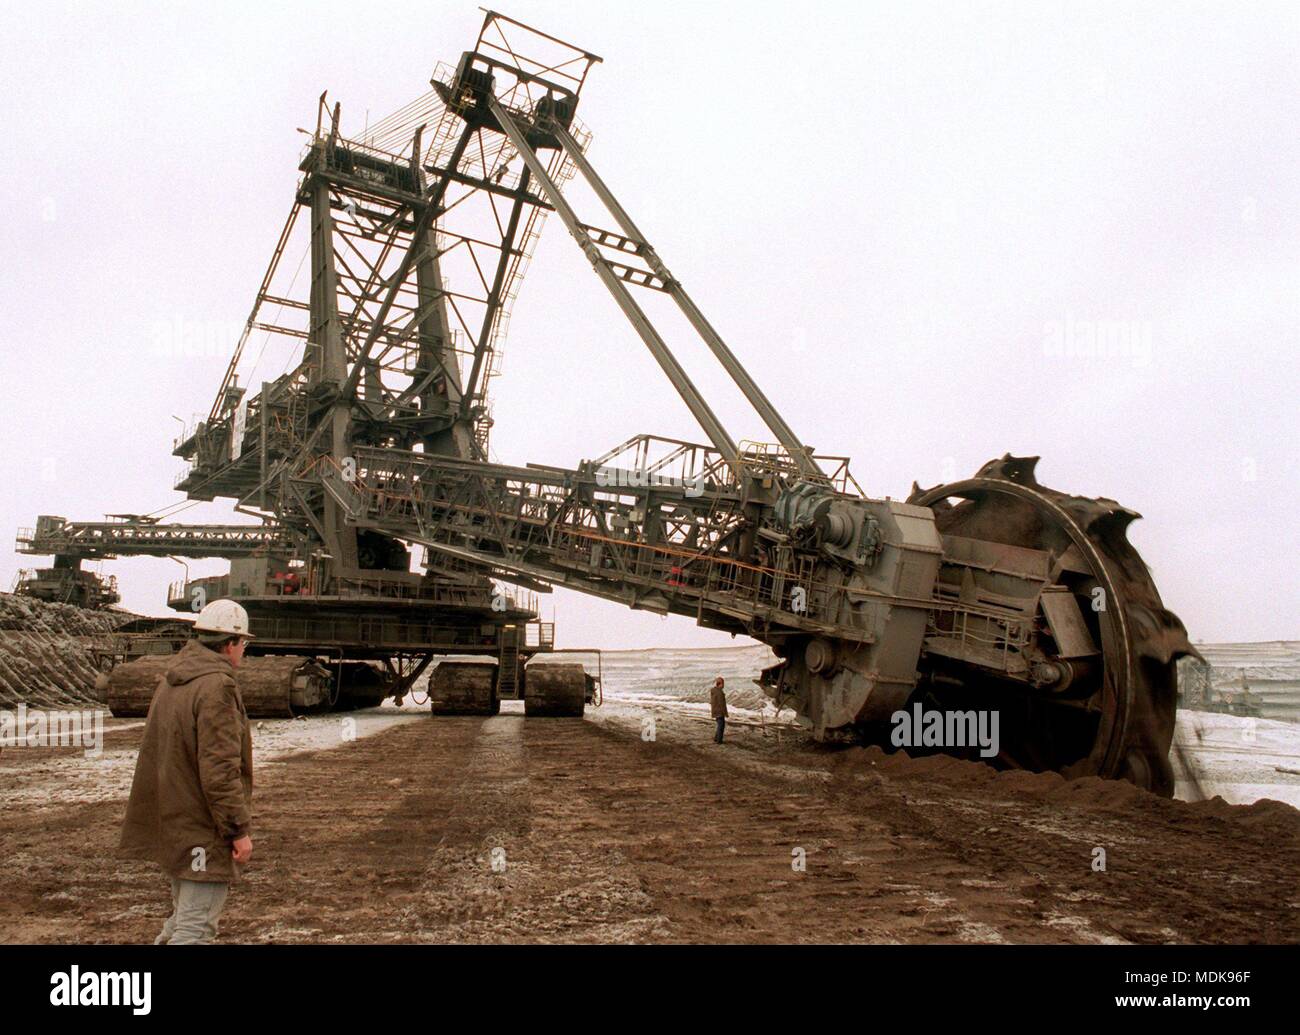 A 'steel monster' resembles a bucket wheel excavator, which on January 22, 1998 calls for around 4,000 tonnes of excavated rock per hour at the brown coal mine near Schoningen near Helmstedt. Braunschweiger Kohlen-Bergwerke AG (BKB), which owns the lignite fields, celebrates its 125th anniversary next Monday (26.01.97). By 2017, lignite will be required in the Helmstedt area. | usage worldwide Stock Photo